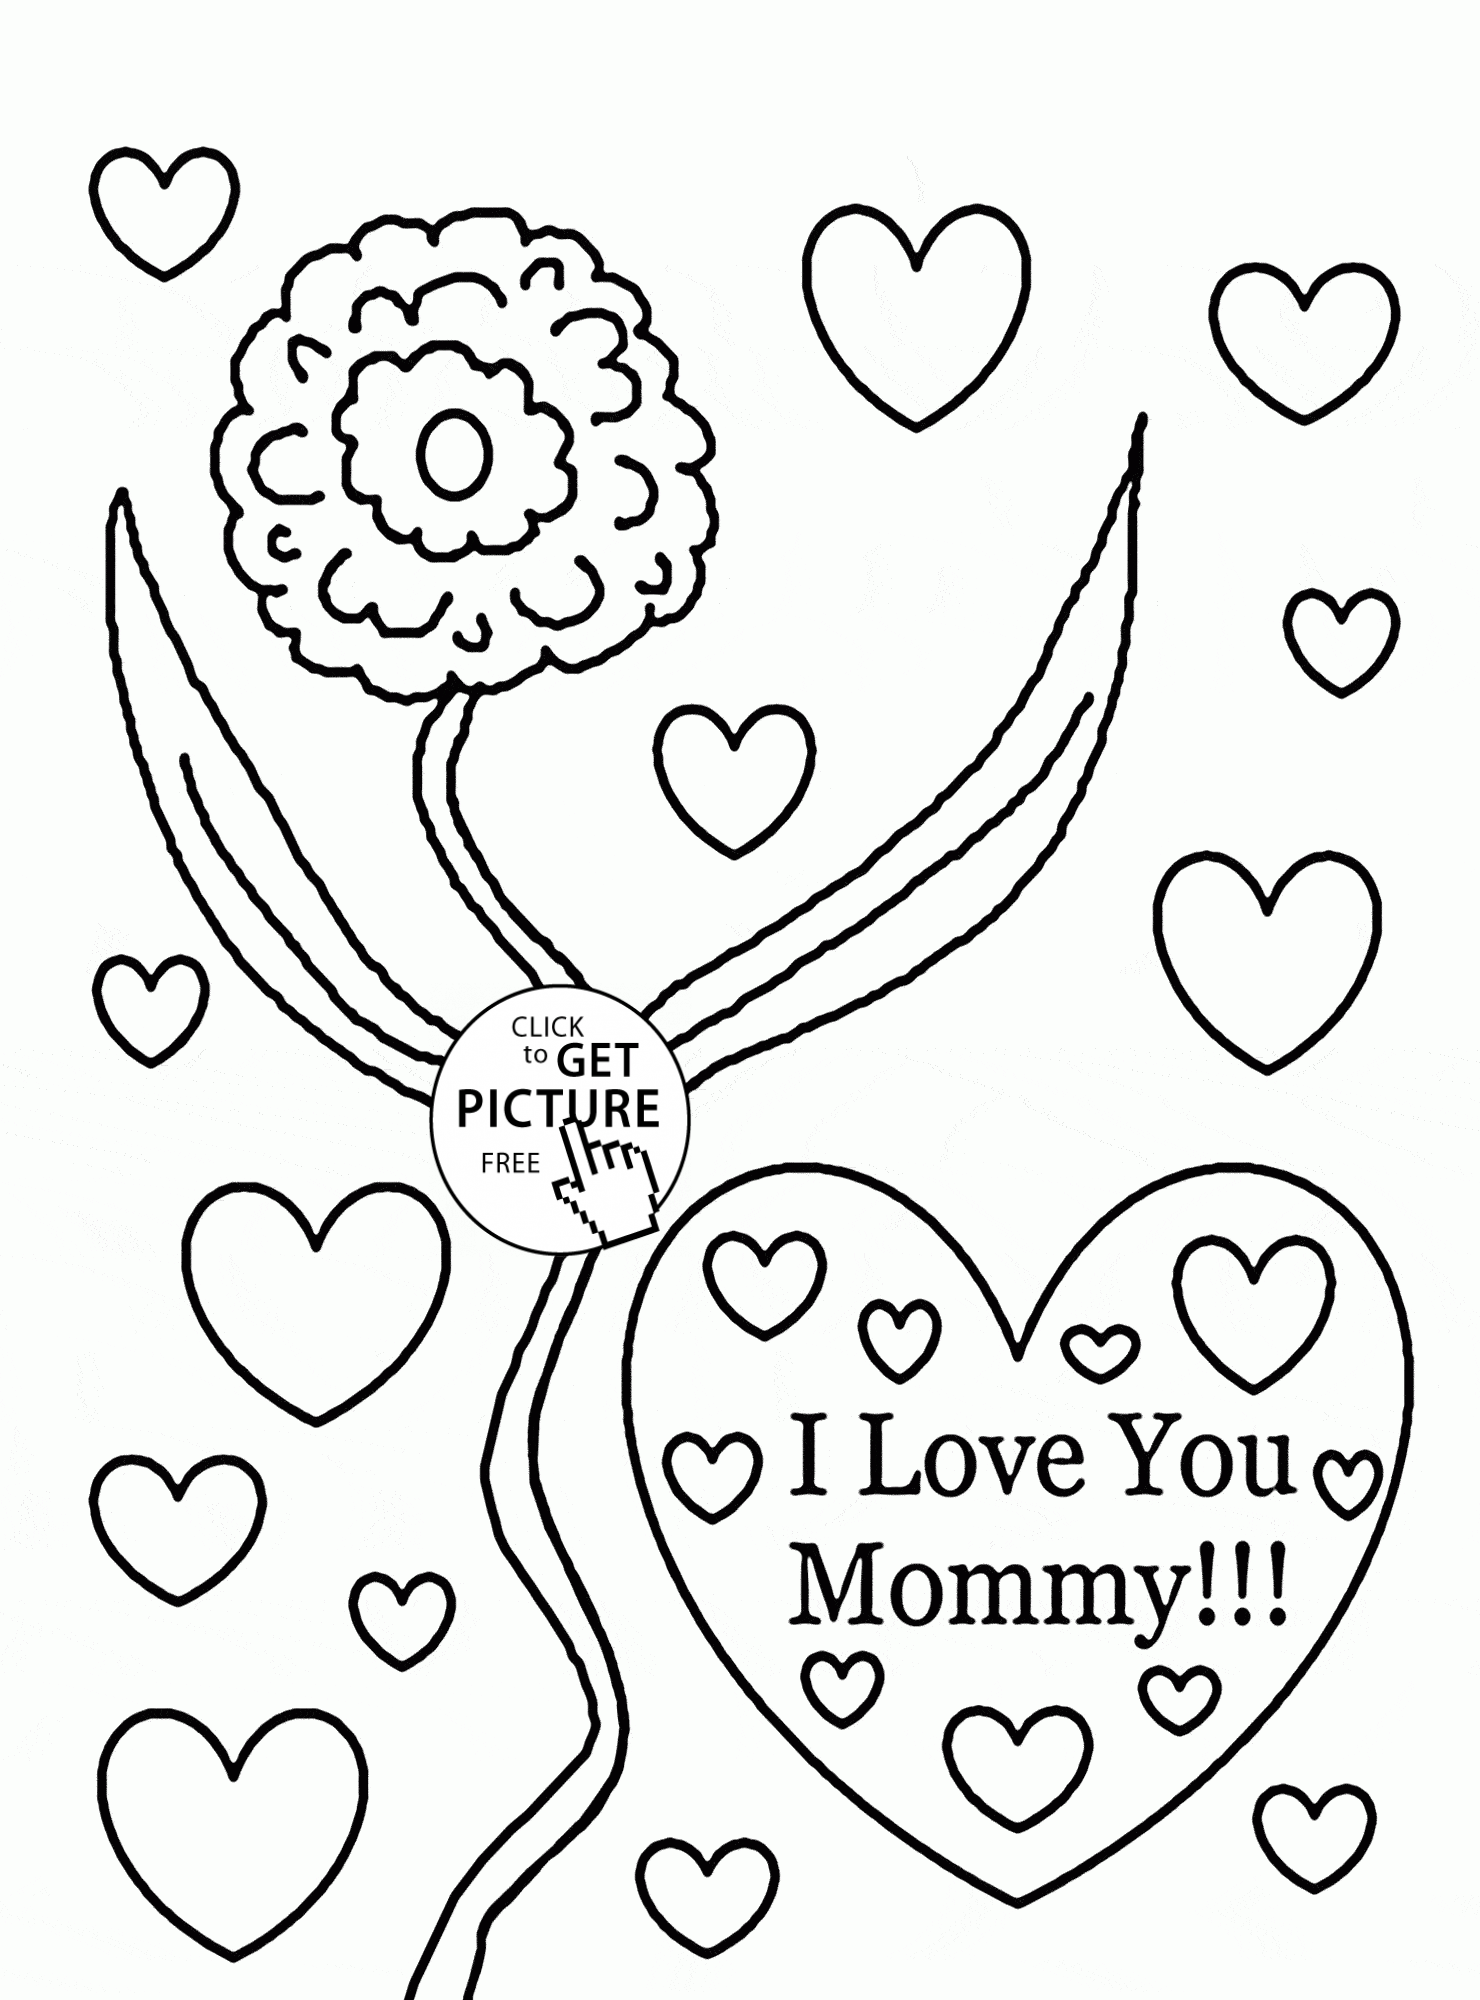 I Love You Mommy - Mother's Day coloring page for kids, coloring ...